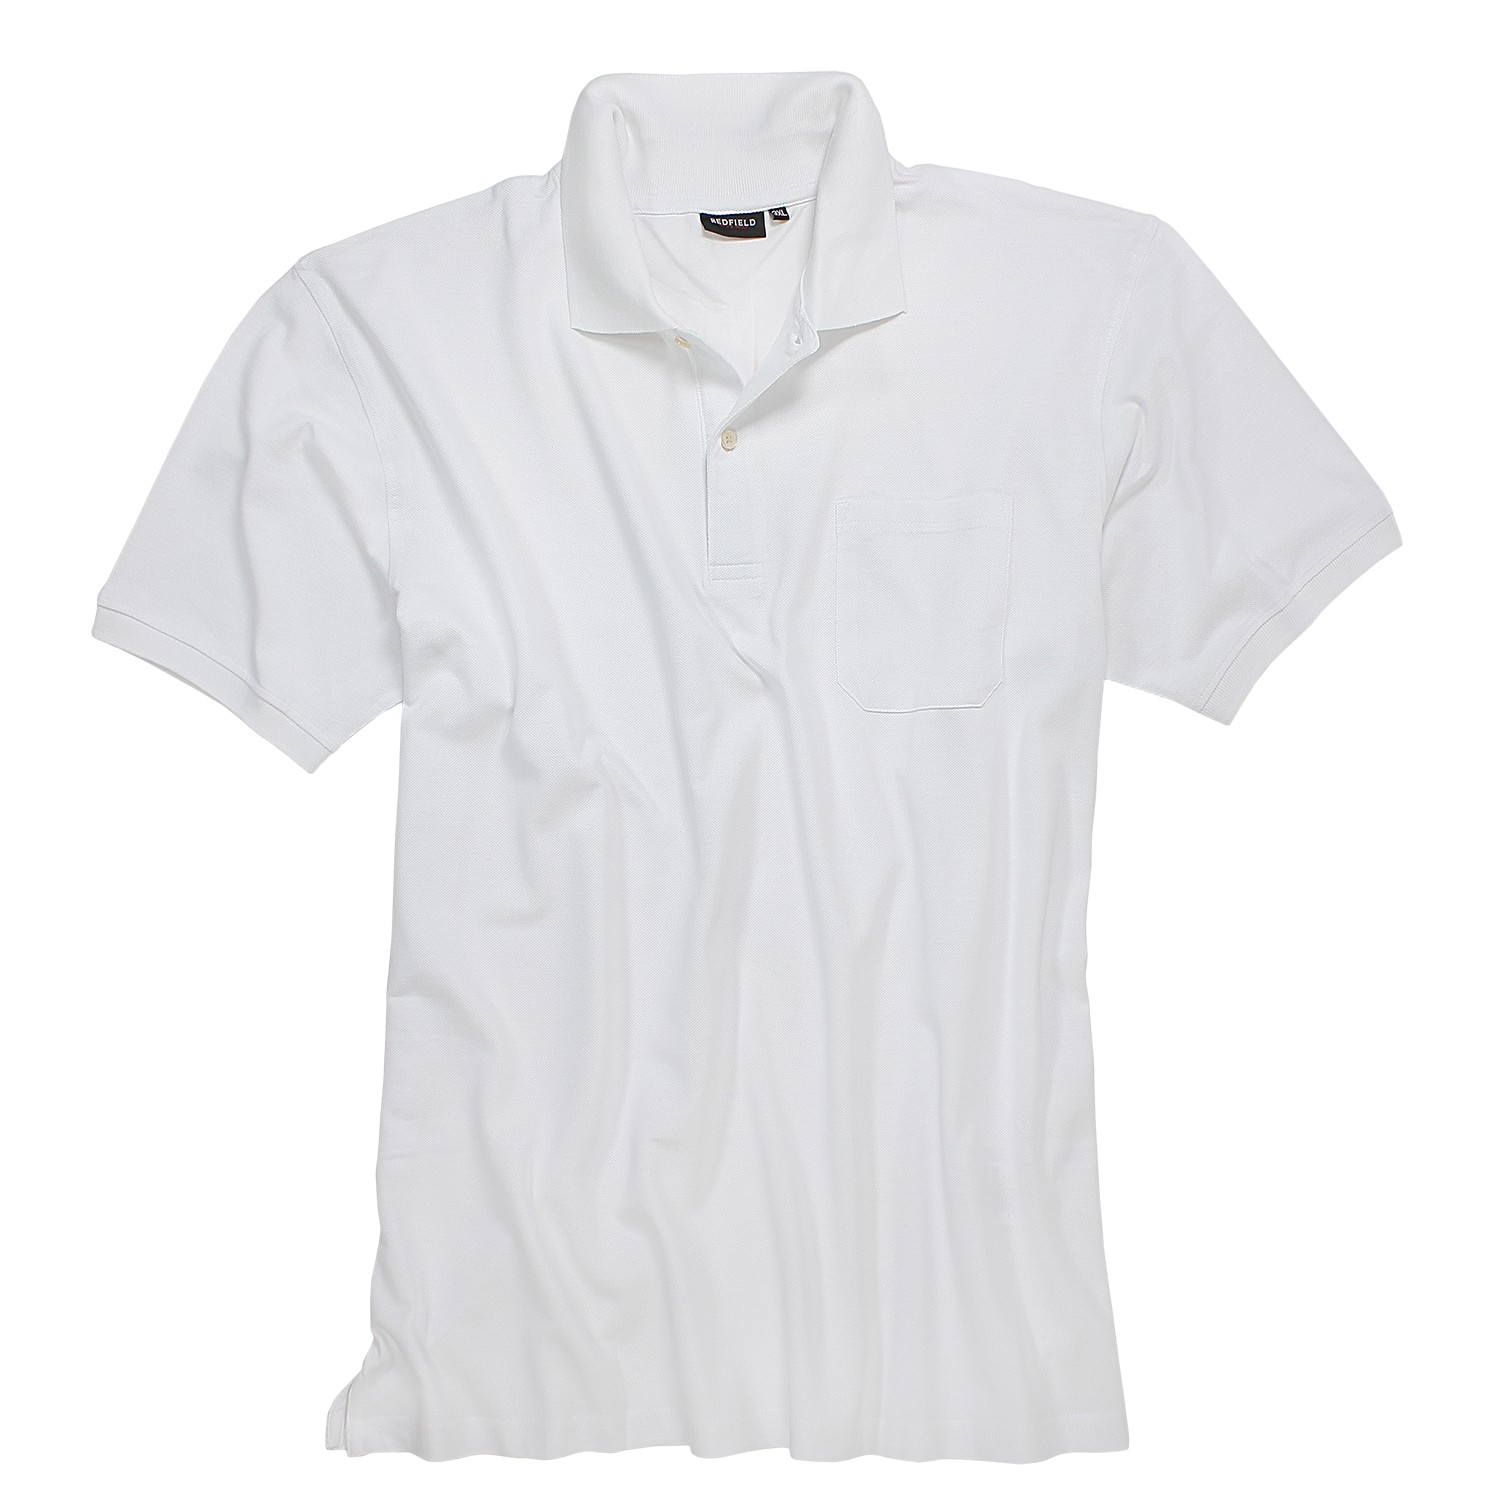 White polo shirt by Redfield in plus sizes until 10XL